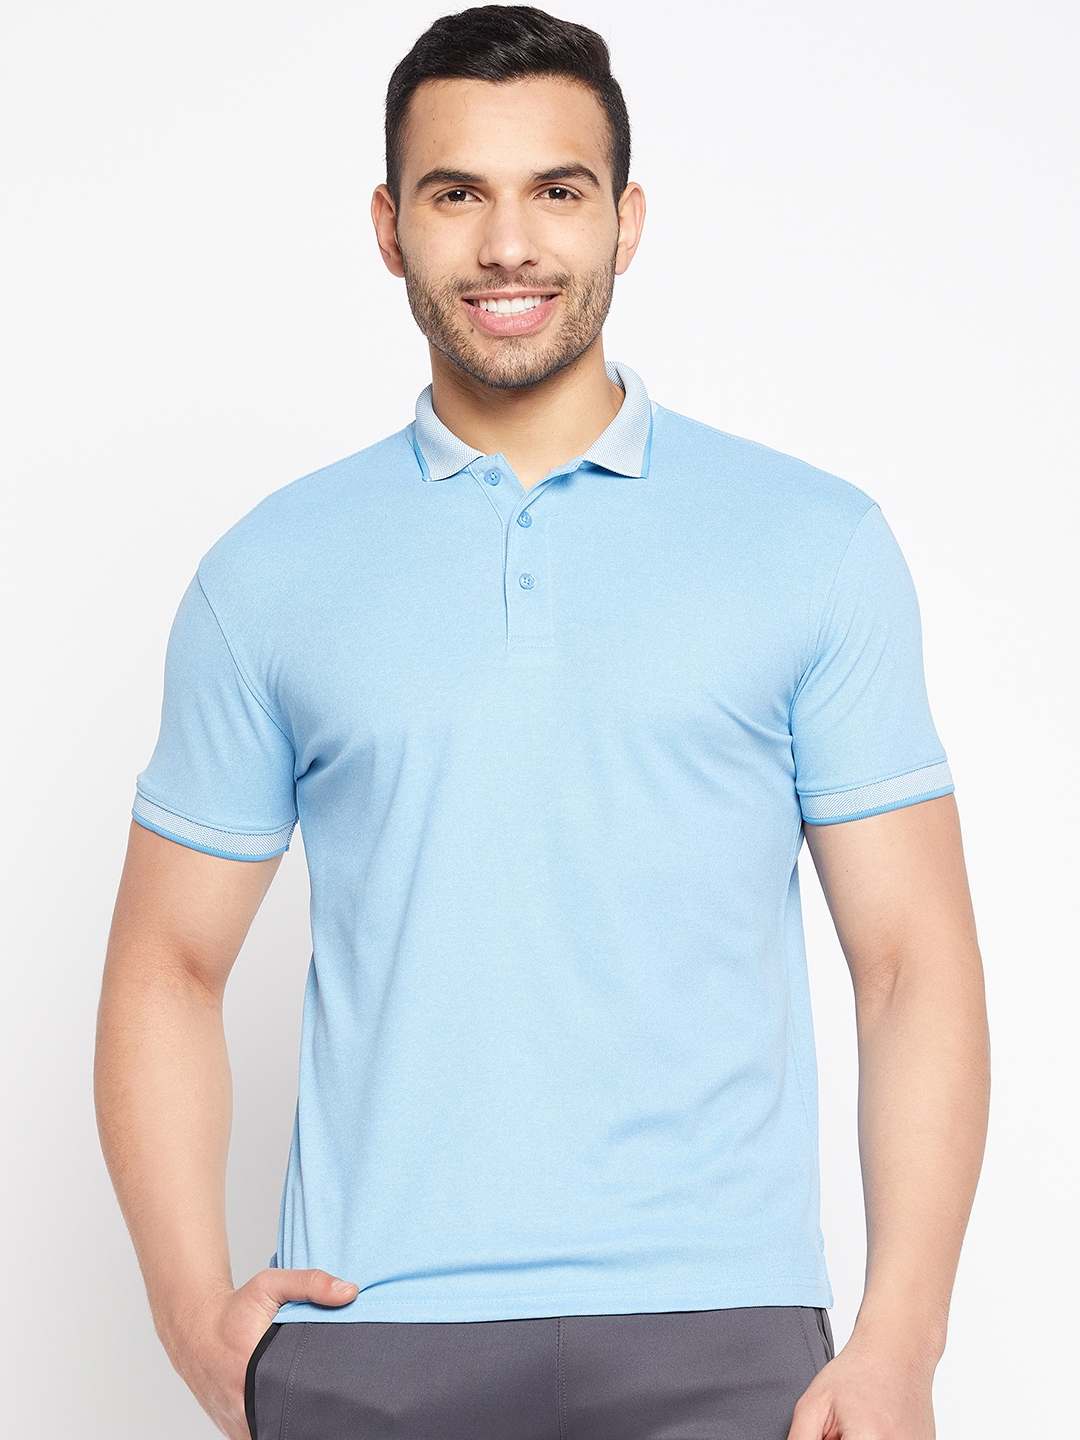 Leisure Polo -Ice Blue - T10 Sports